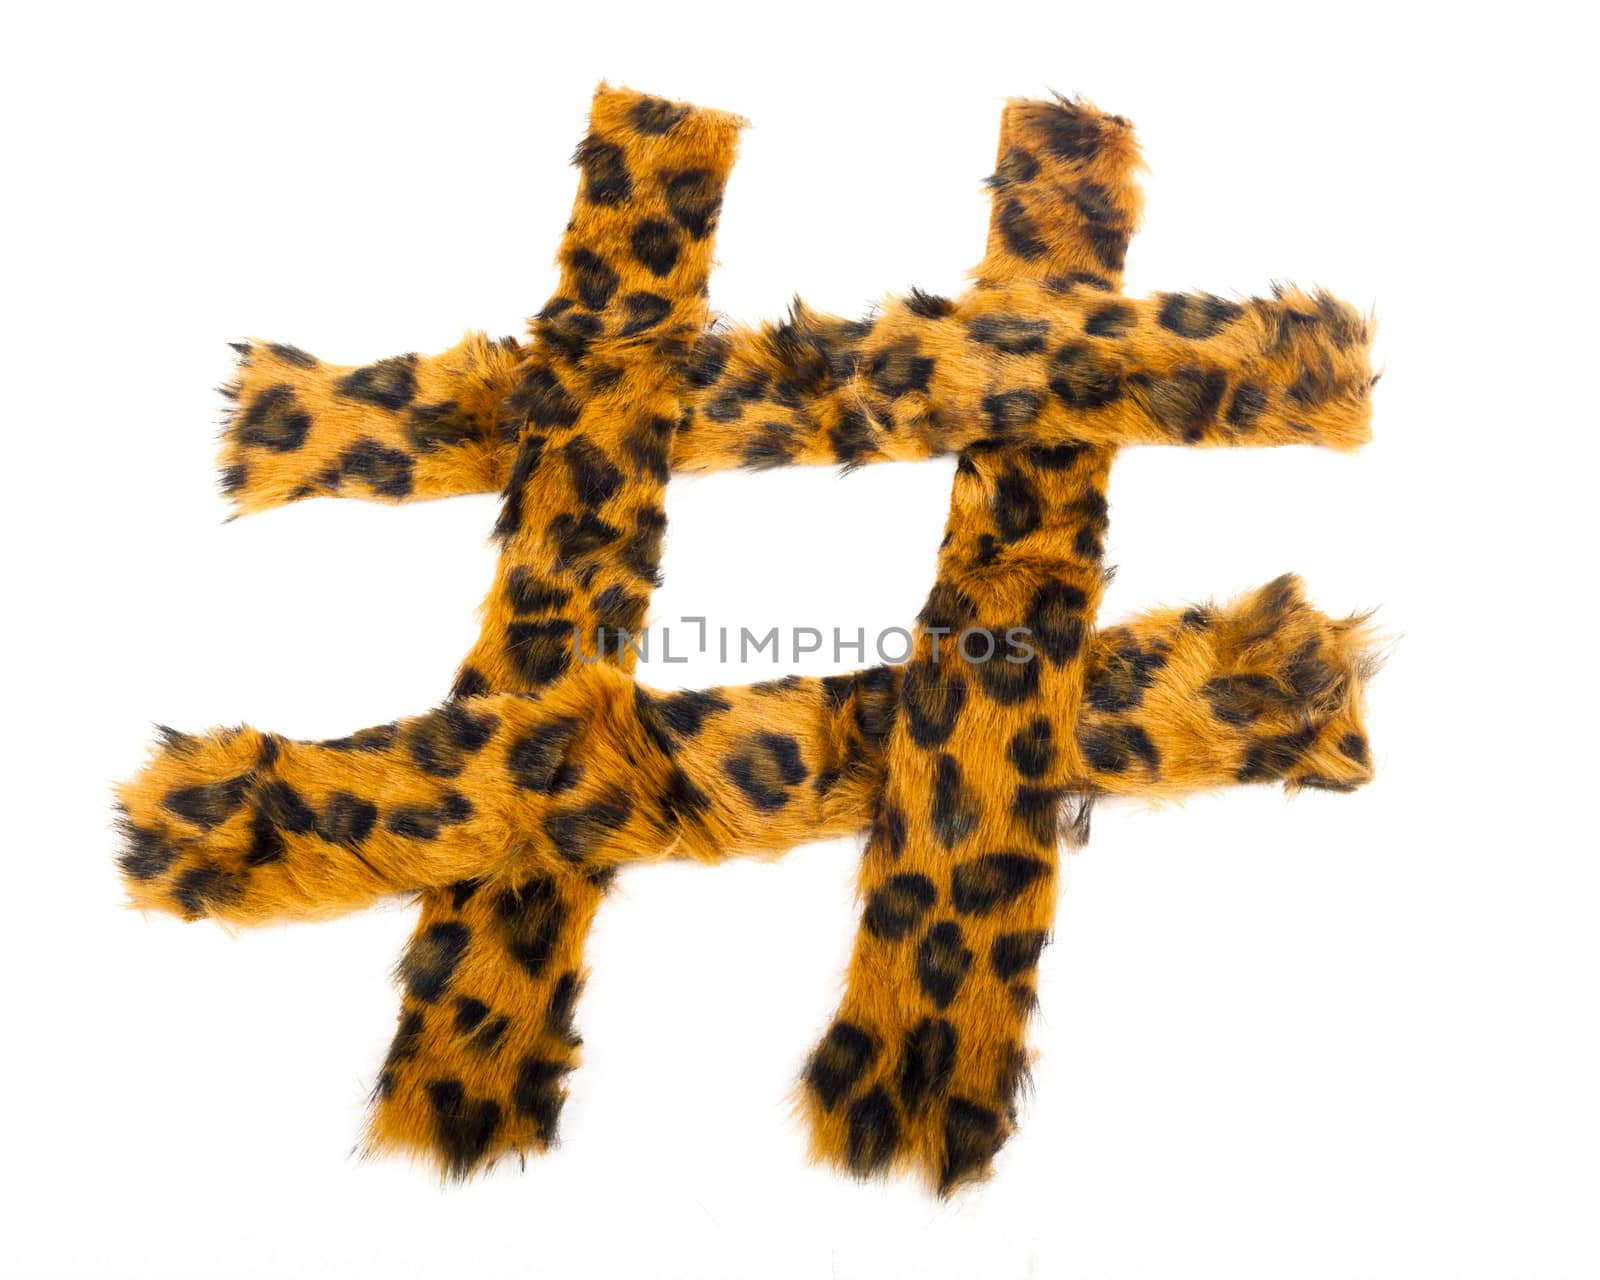 A hashtag made of leopard print fur against a white background.